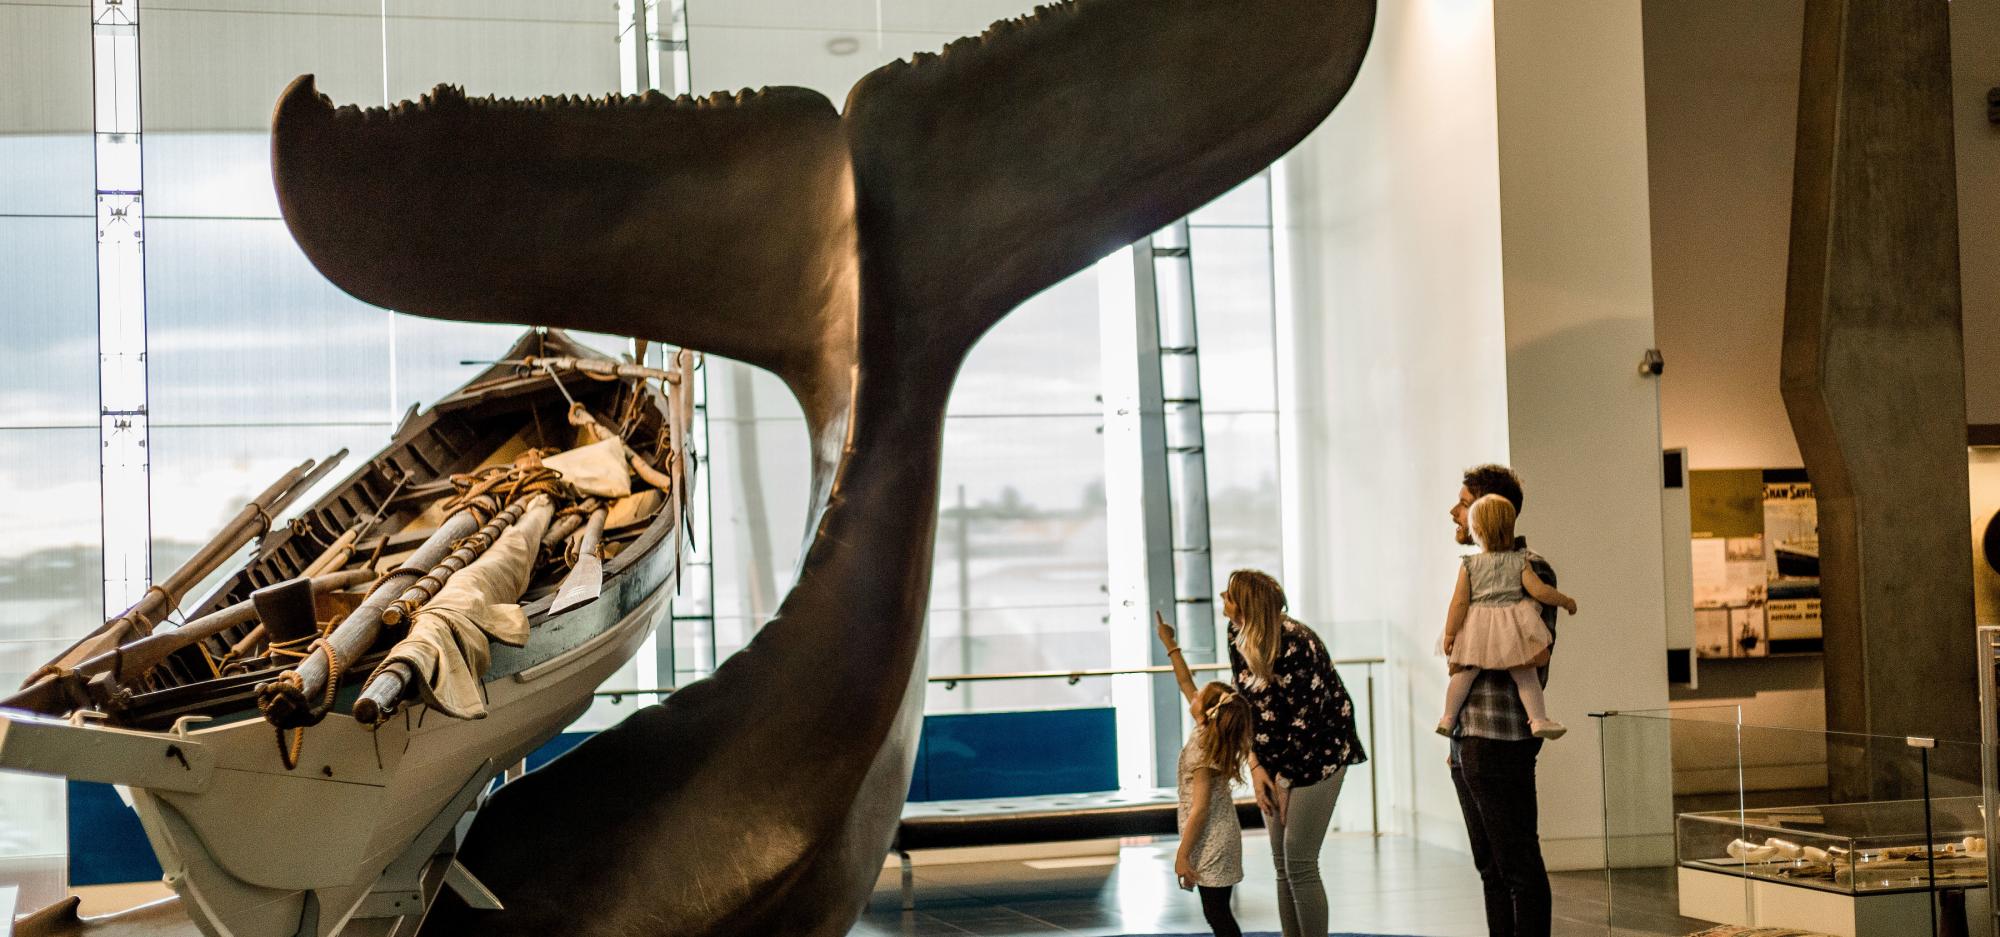 A family pause to examine a large model of a whale's tail in a museum